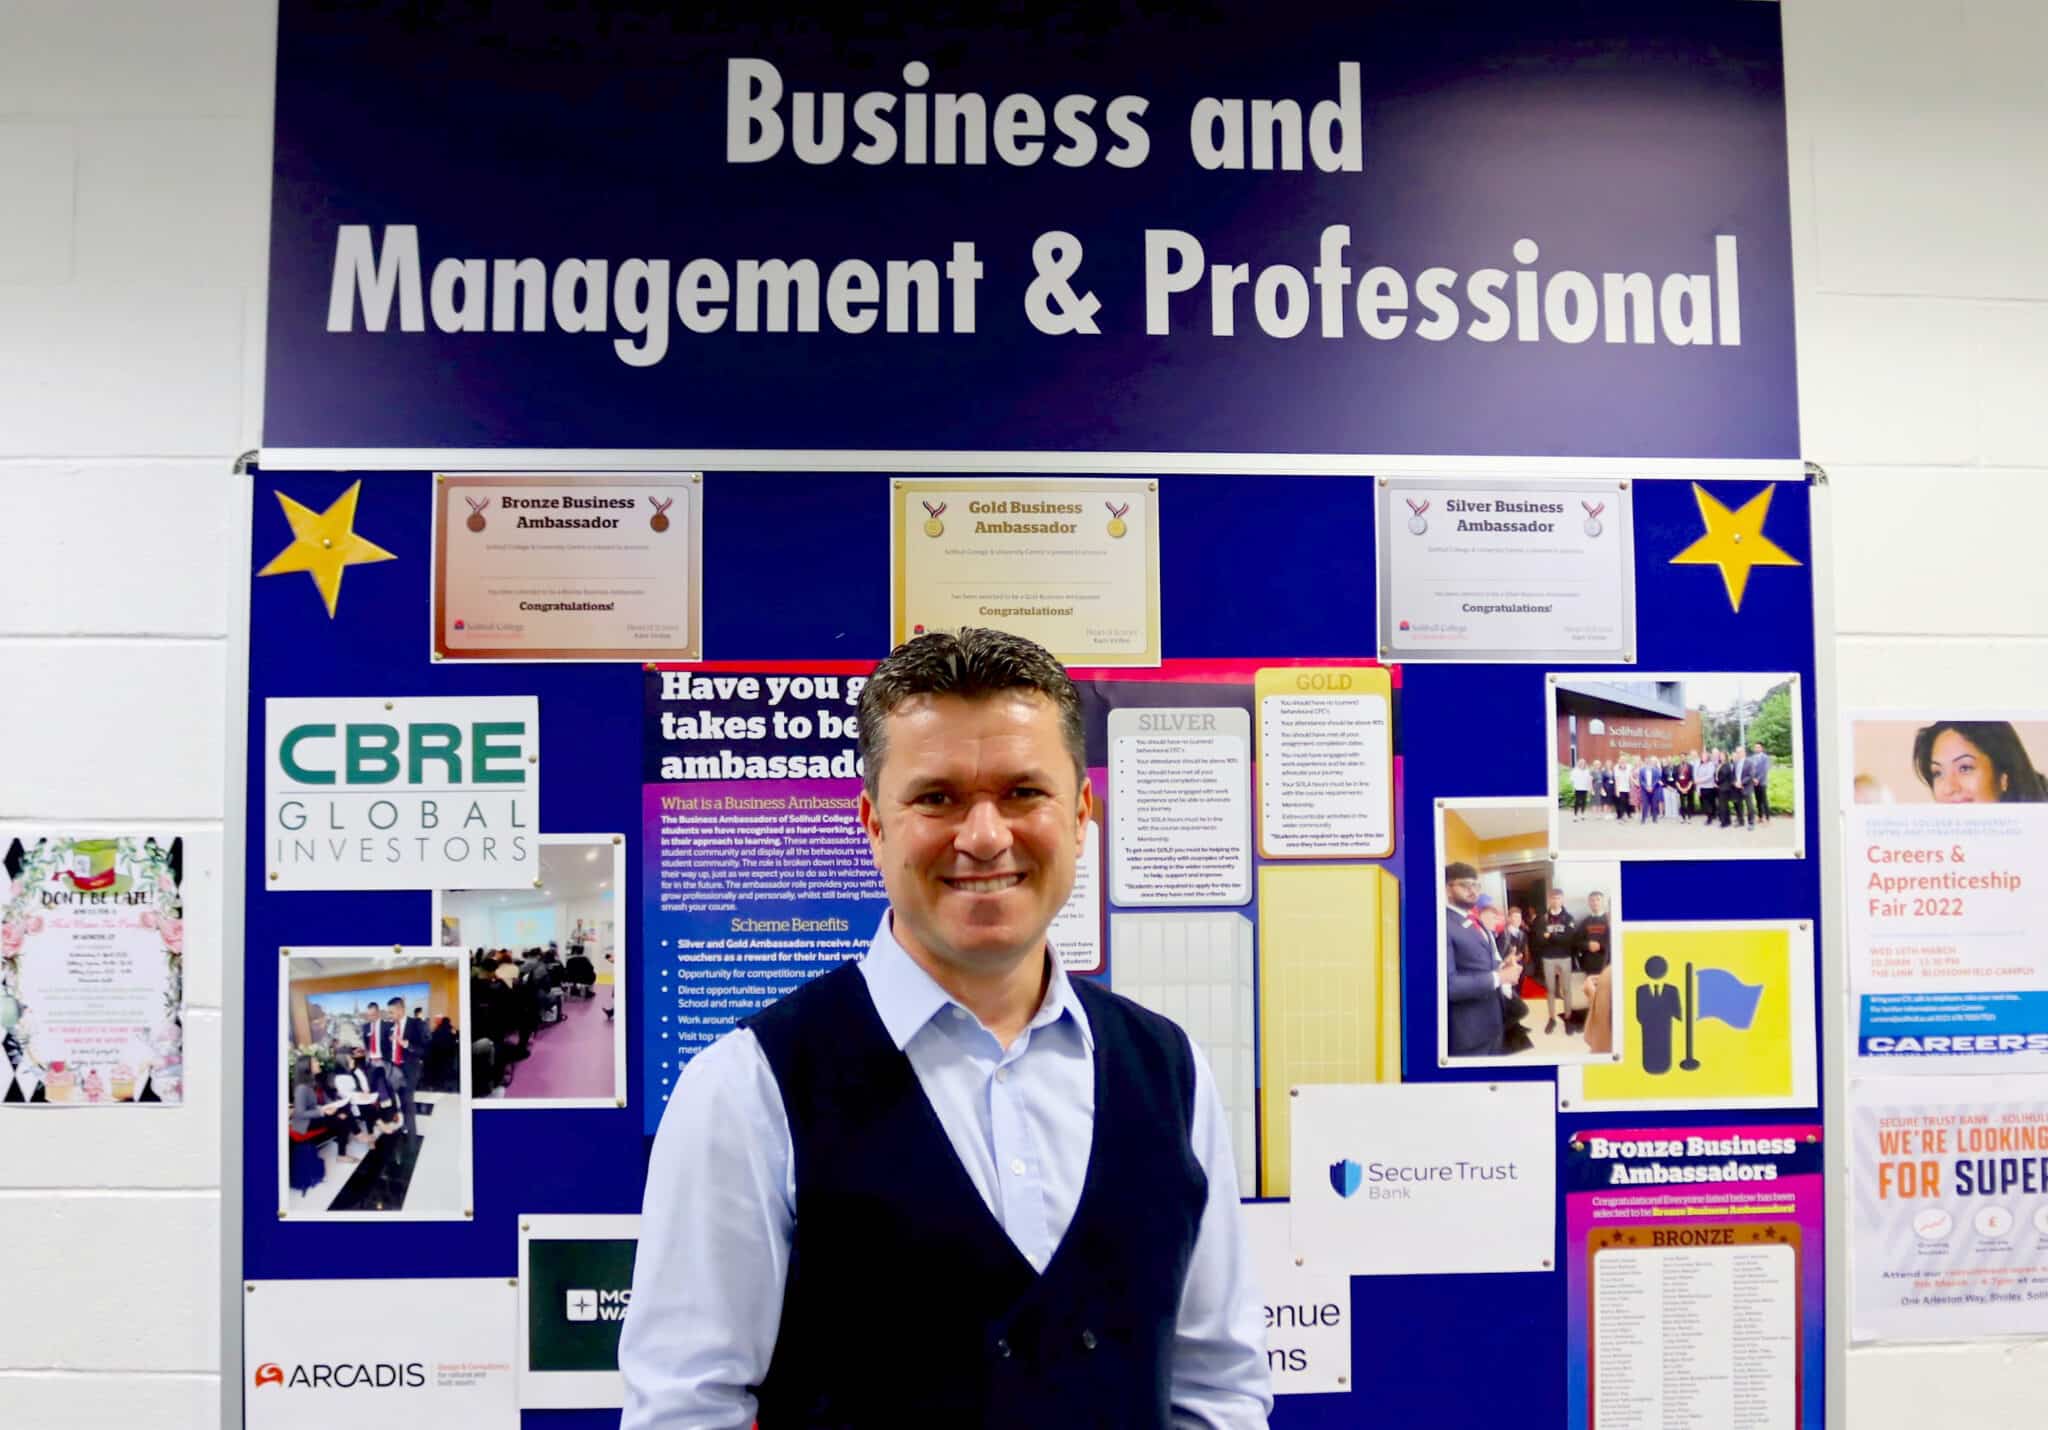 Hakan standing in front of board that reads Business and Management & Professional at the top